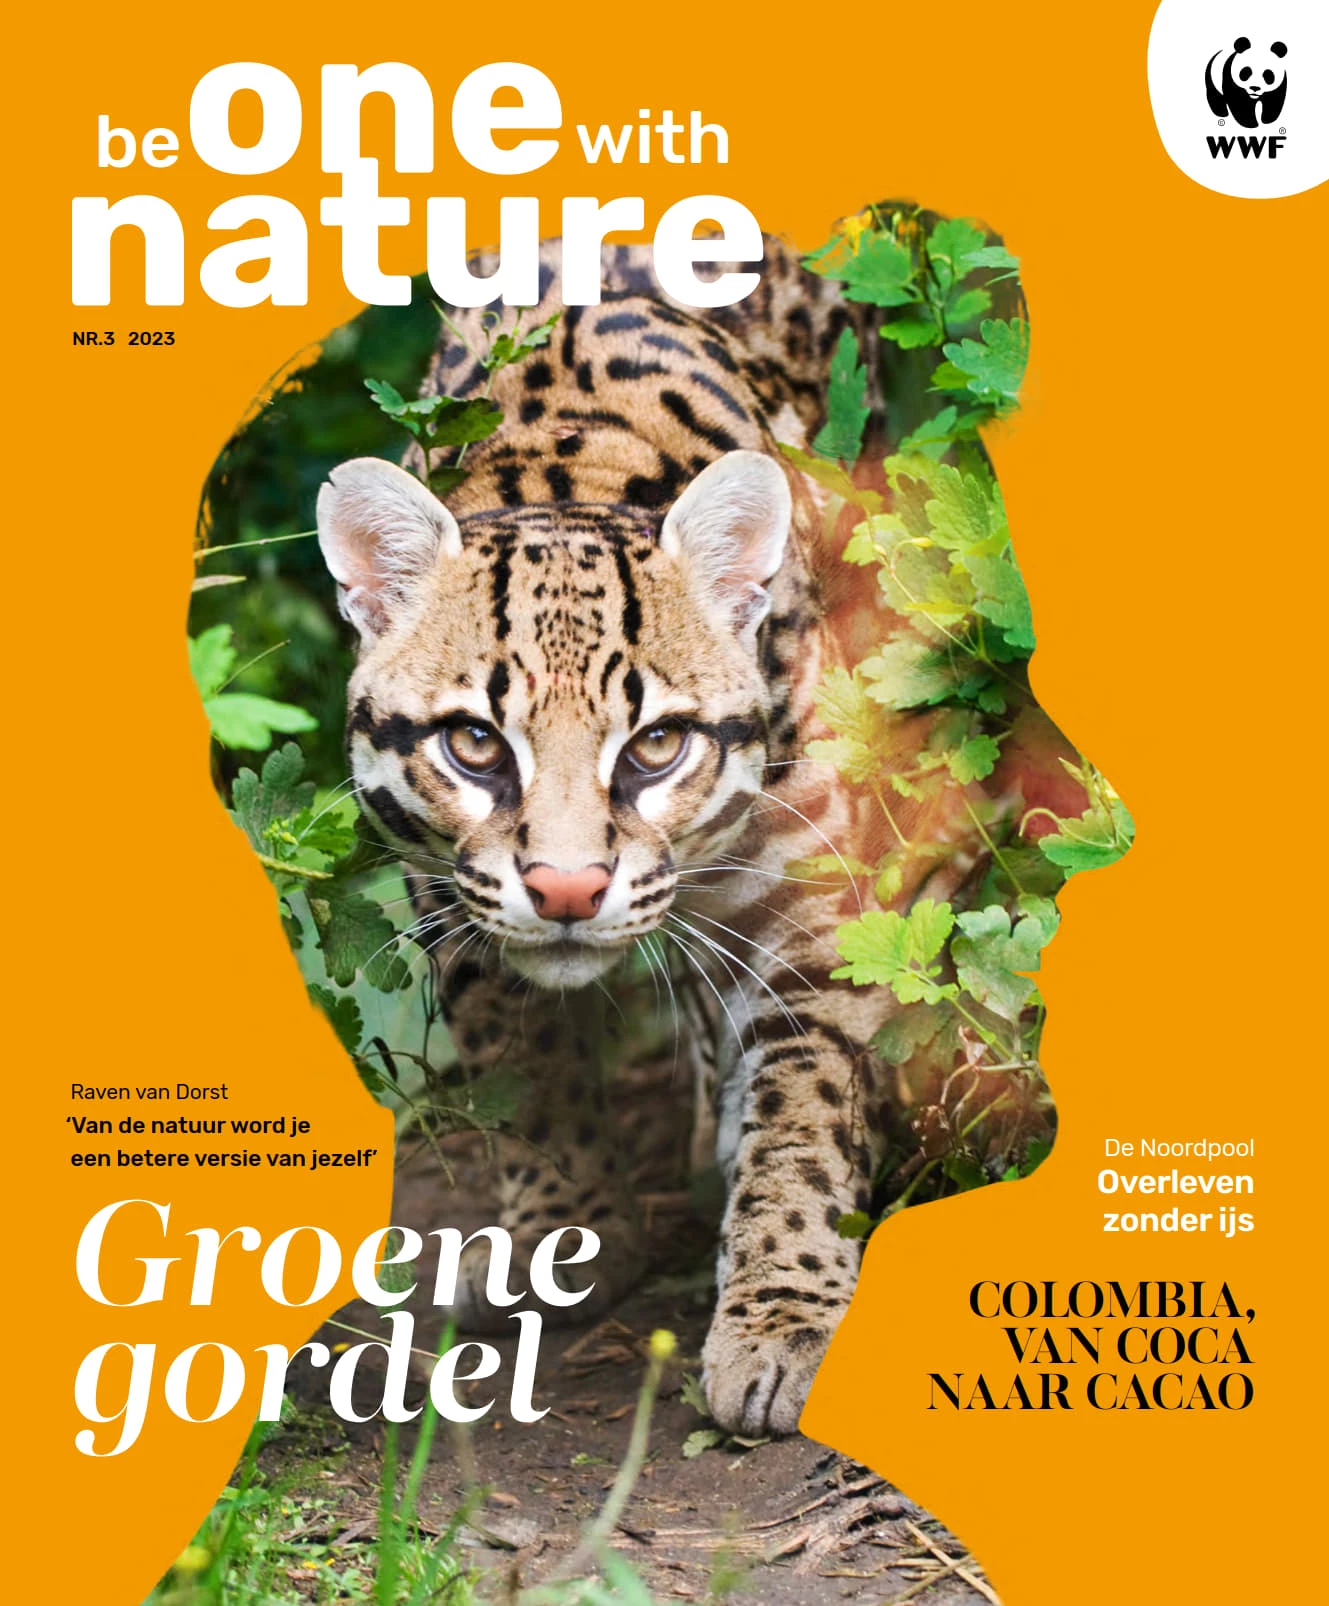 Be one with nature cover oktober 2023.jpg